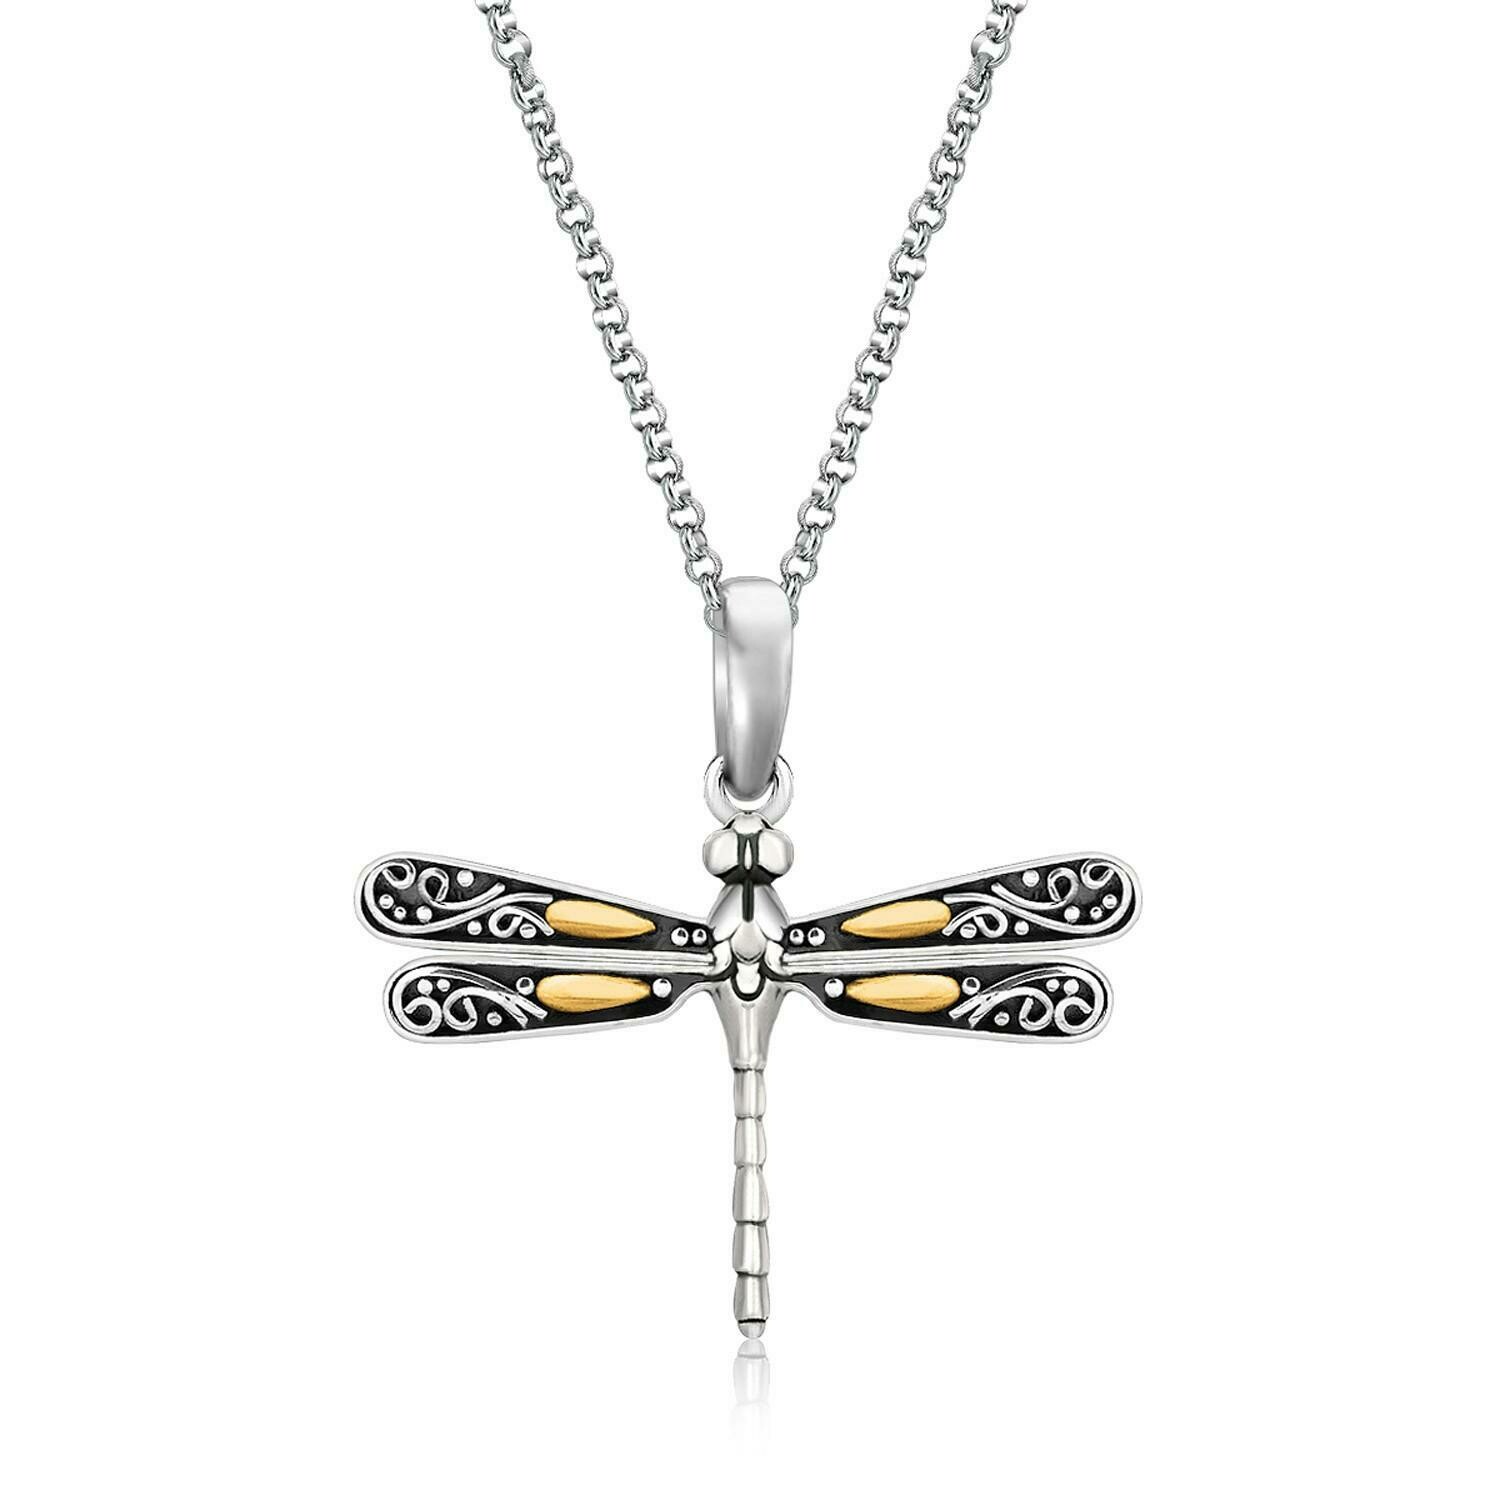 18k Yellow Gold and Sterling Silver Pendant in a Dragonfly Design, Size: 18